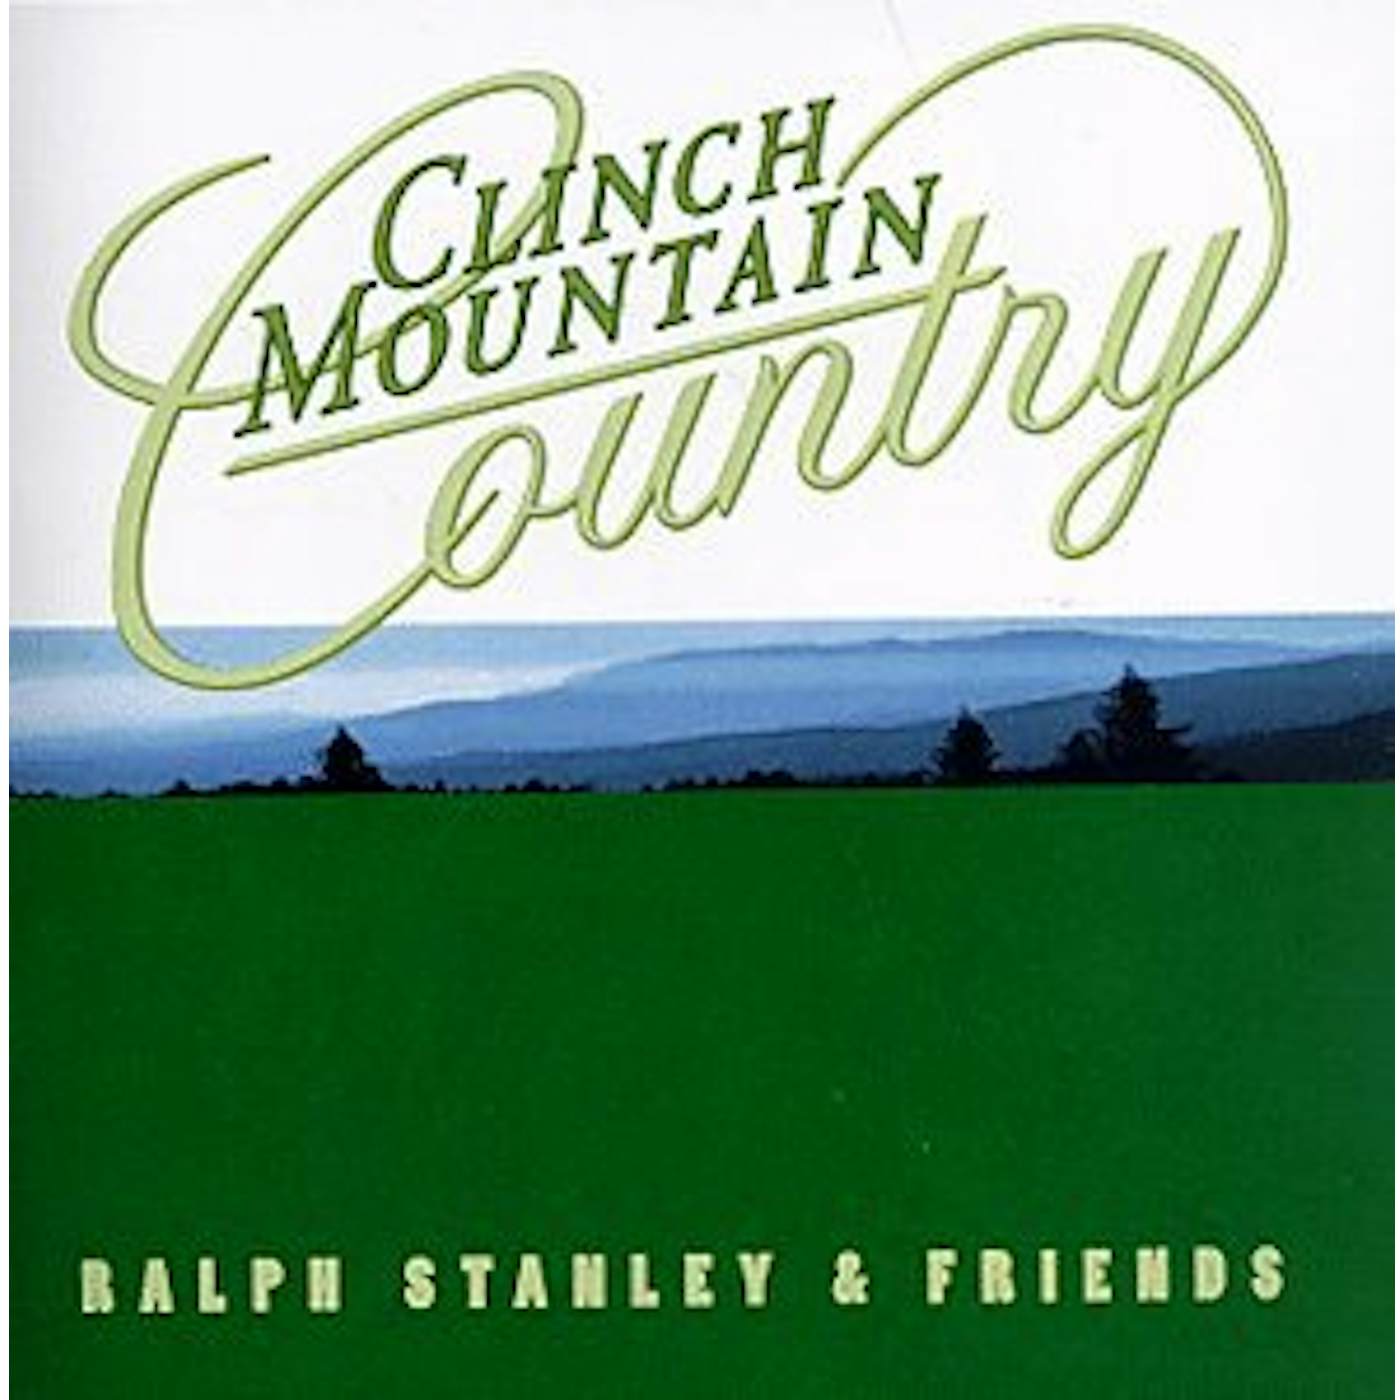 Ralph Stanley CLINCH MOUNTAIN COUNTRY CD